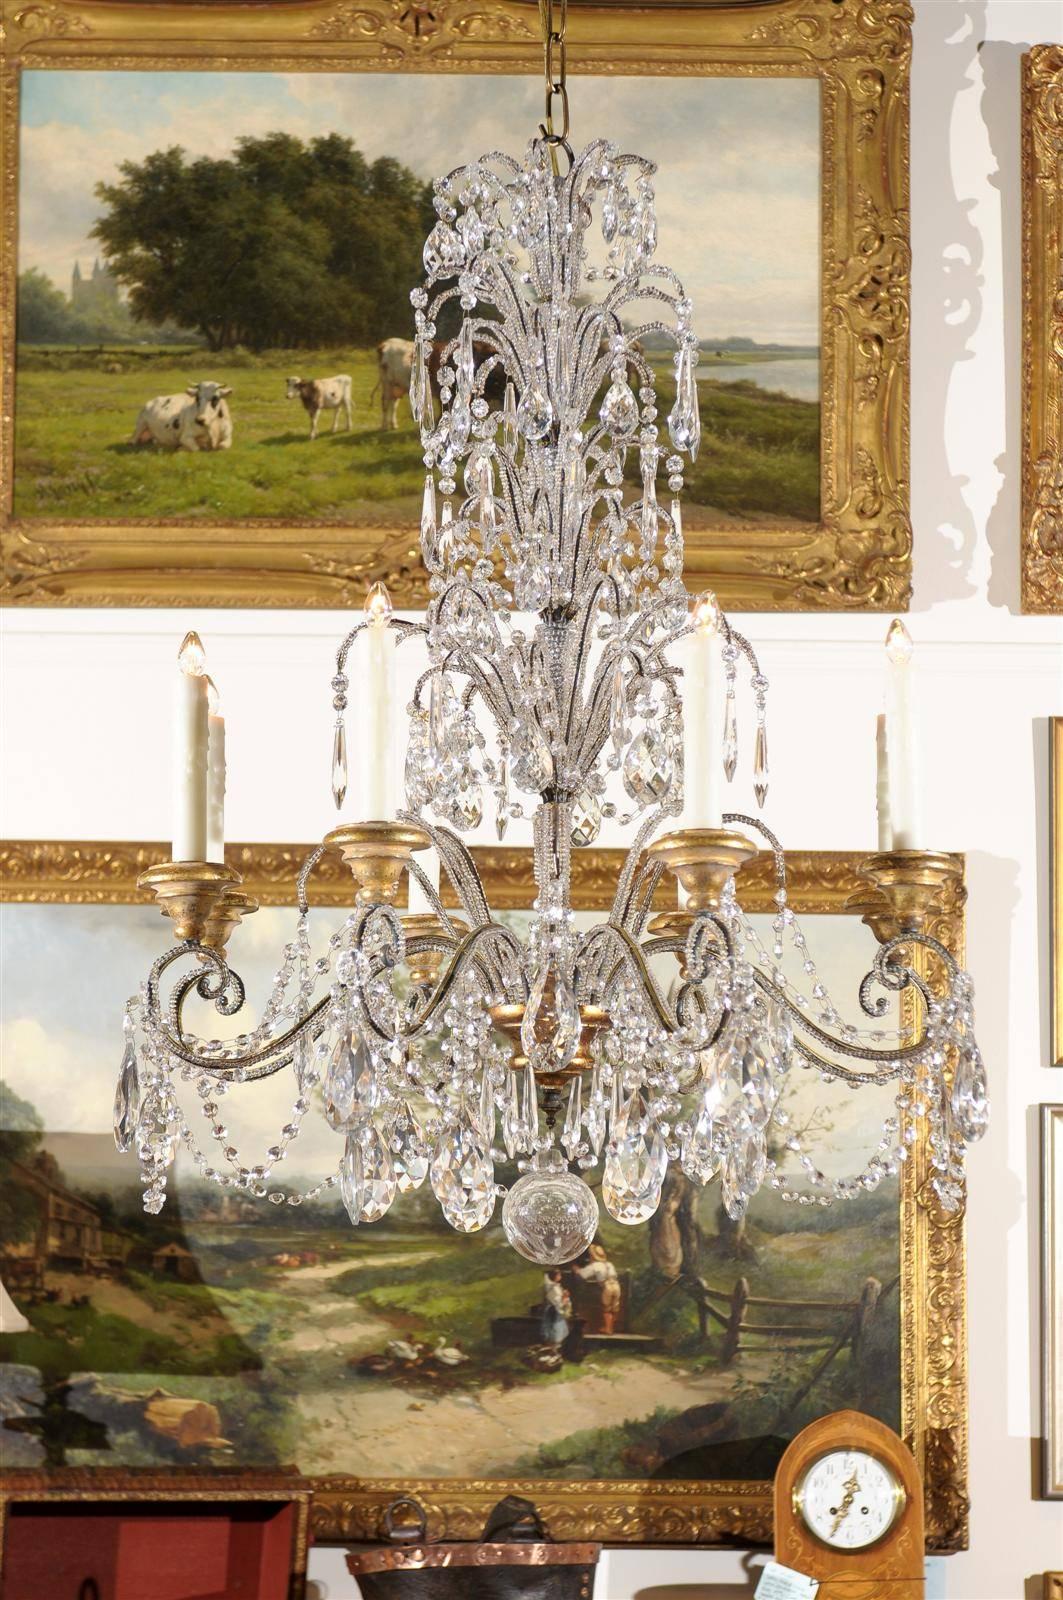 An Italian eight-light crystal chandelier with fountain-like central column and scrolled arms from the 20th century. One cannot but be attracted to the upper section of this crystal chandelier, imitating bustling jets, springing from an imagined